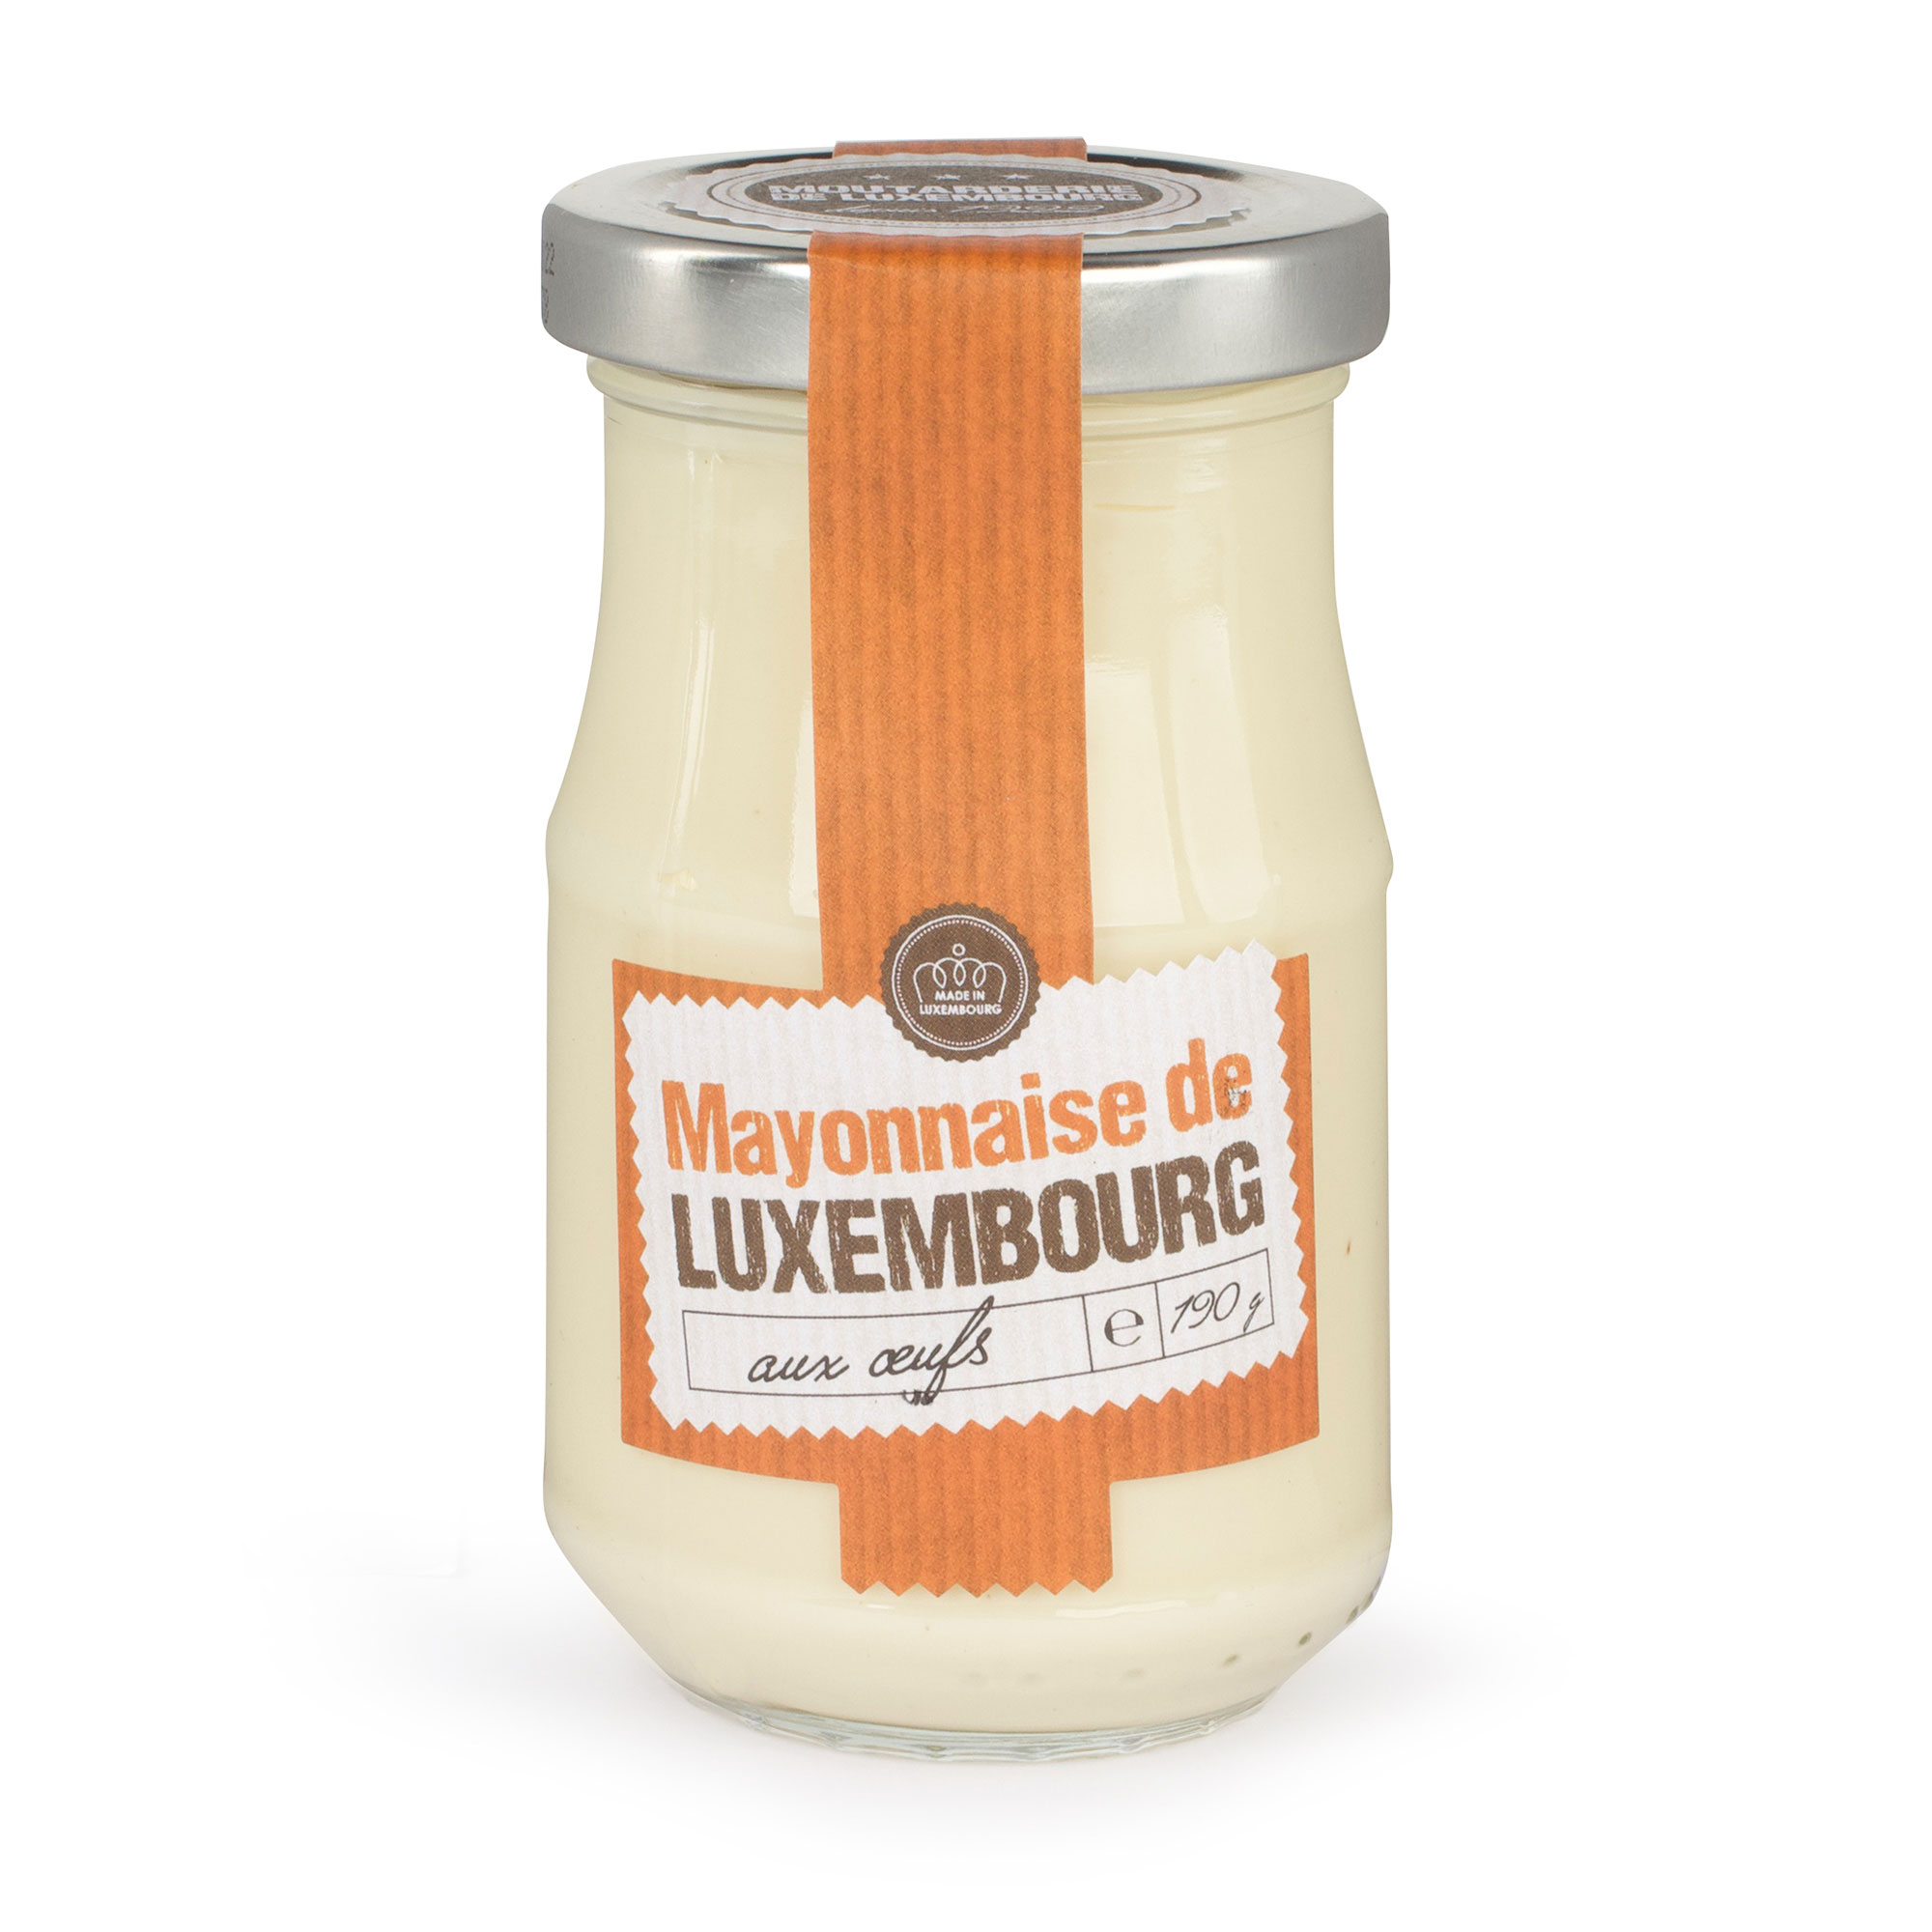 Mayonnaise de Luxembourg